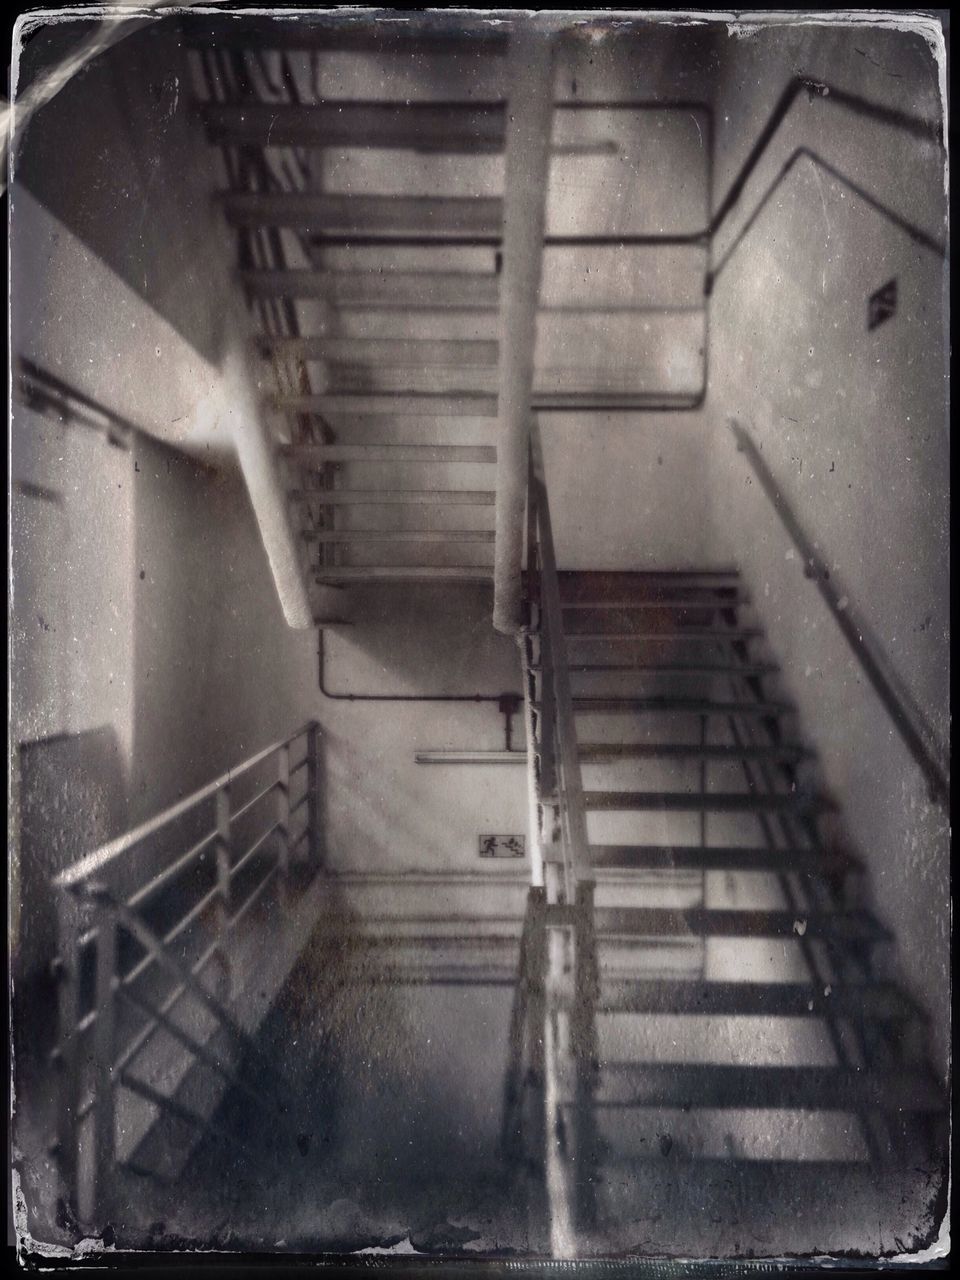 transfer print, auto post production filter, steps, indoors, steps and staircases, staircase, architecture, railing, built structure, metal, high angle view, wall - building feature, stairs, building, low angle view, wall, no people, door, old, abandoned